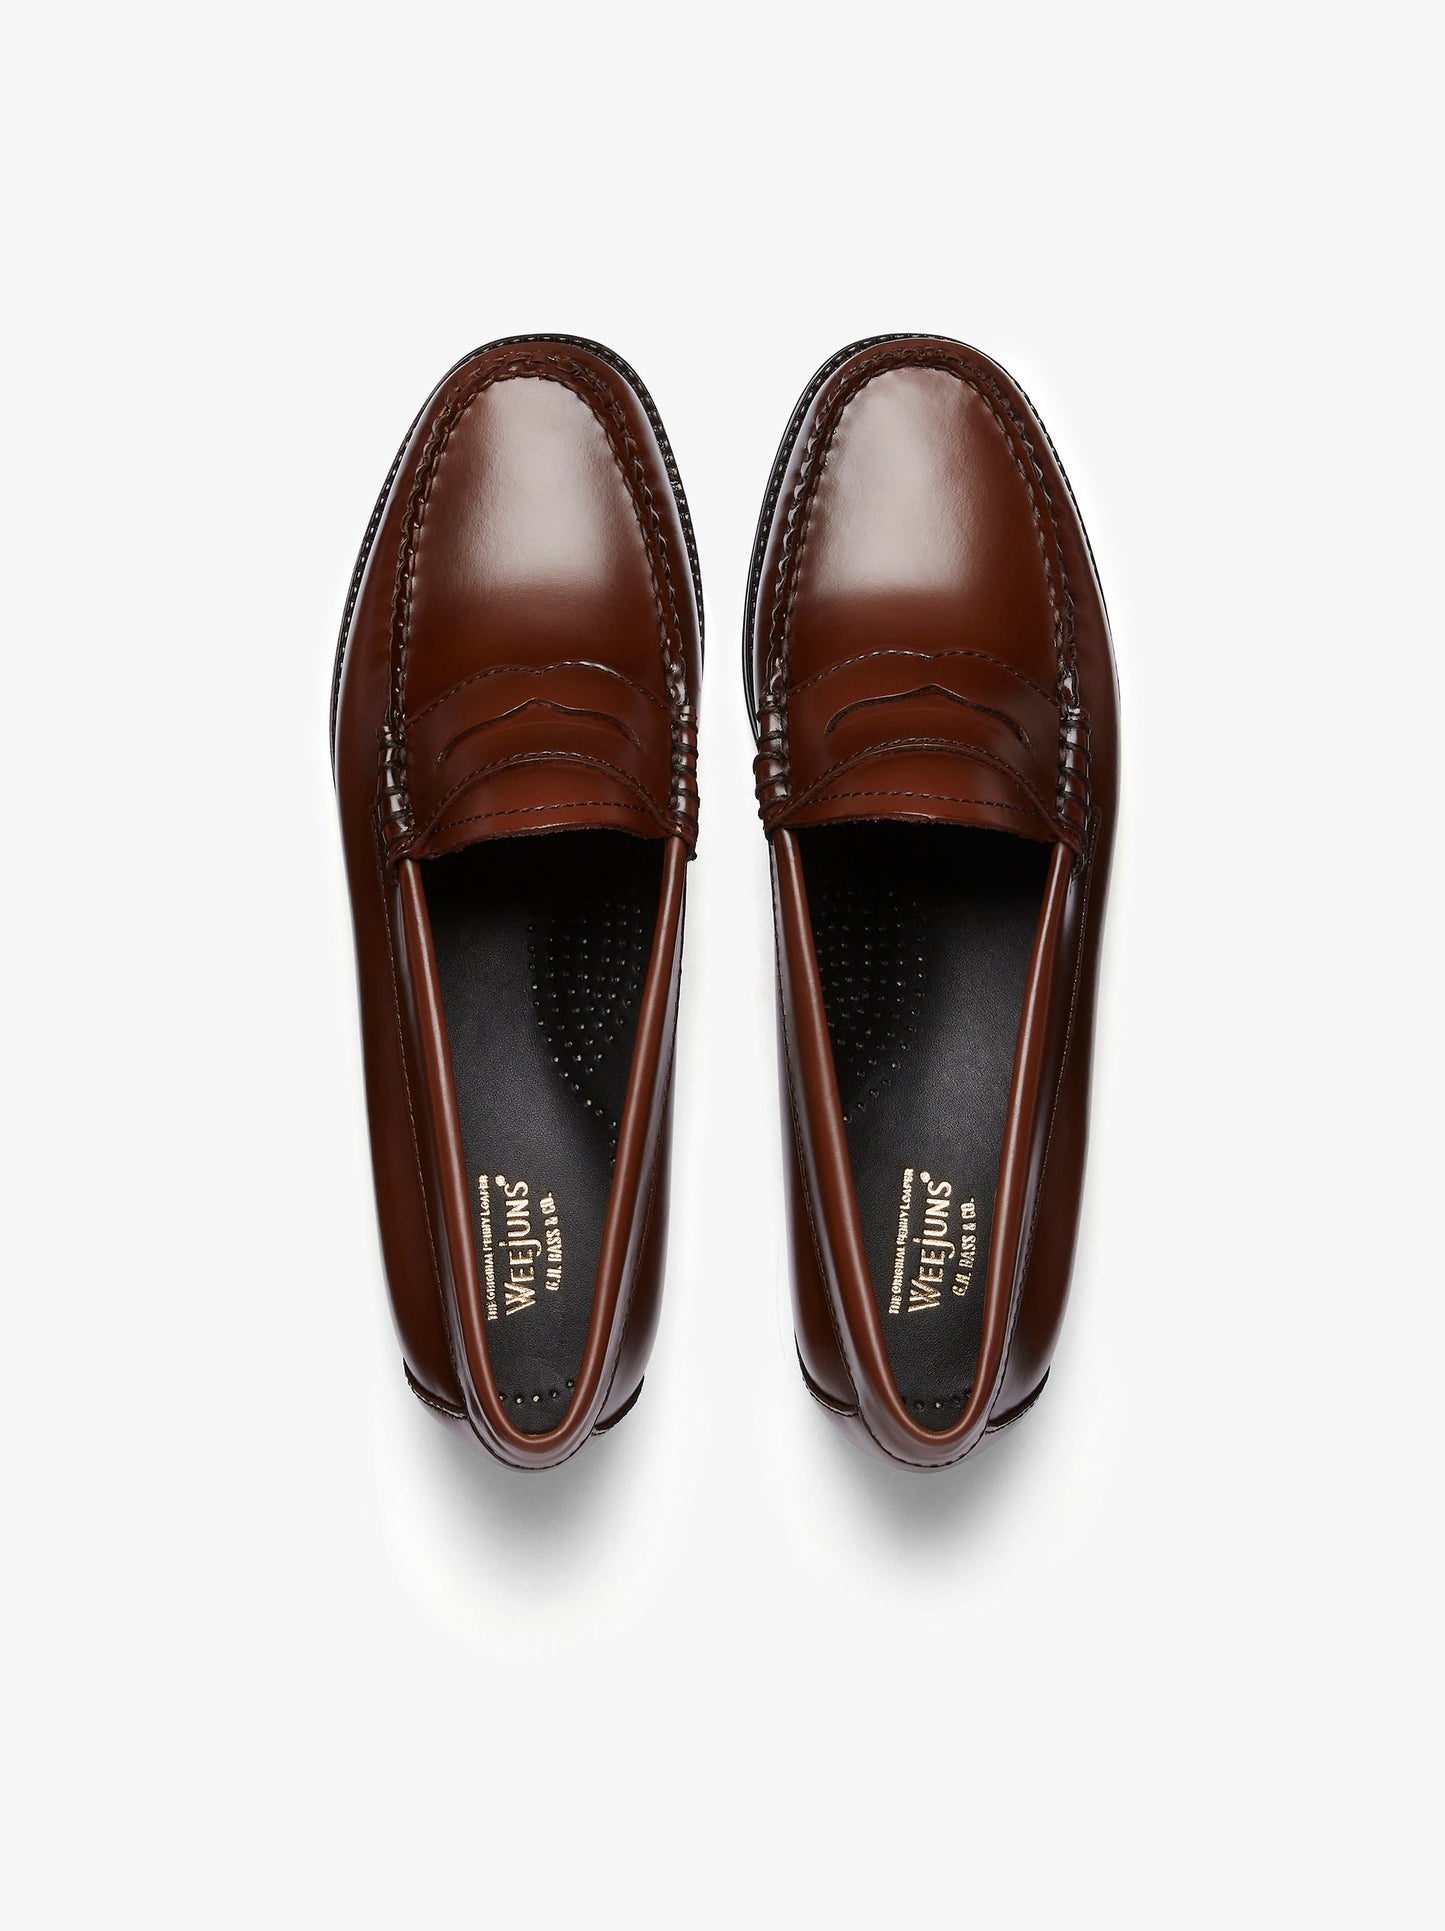 G.H. BASS- Weejuns Penny Loafers Cognac Leather